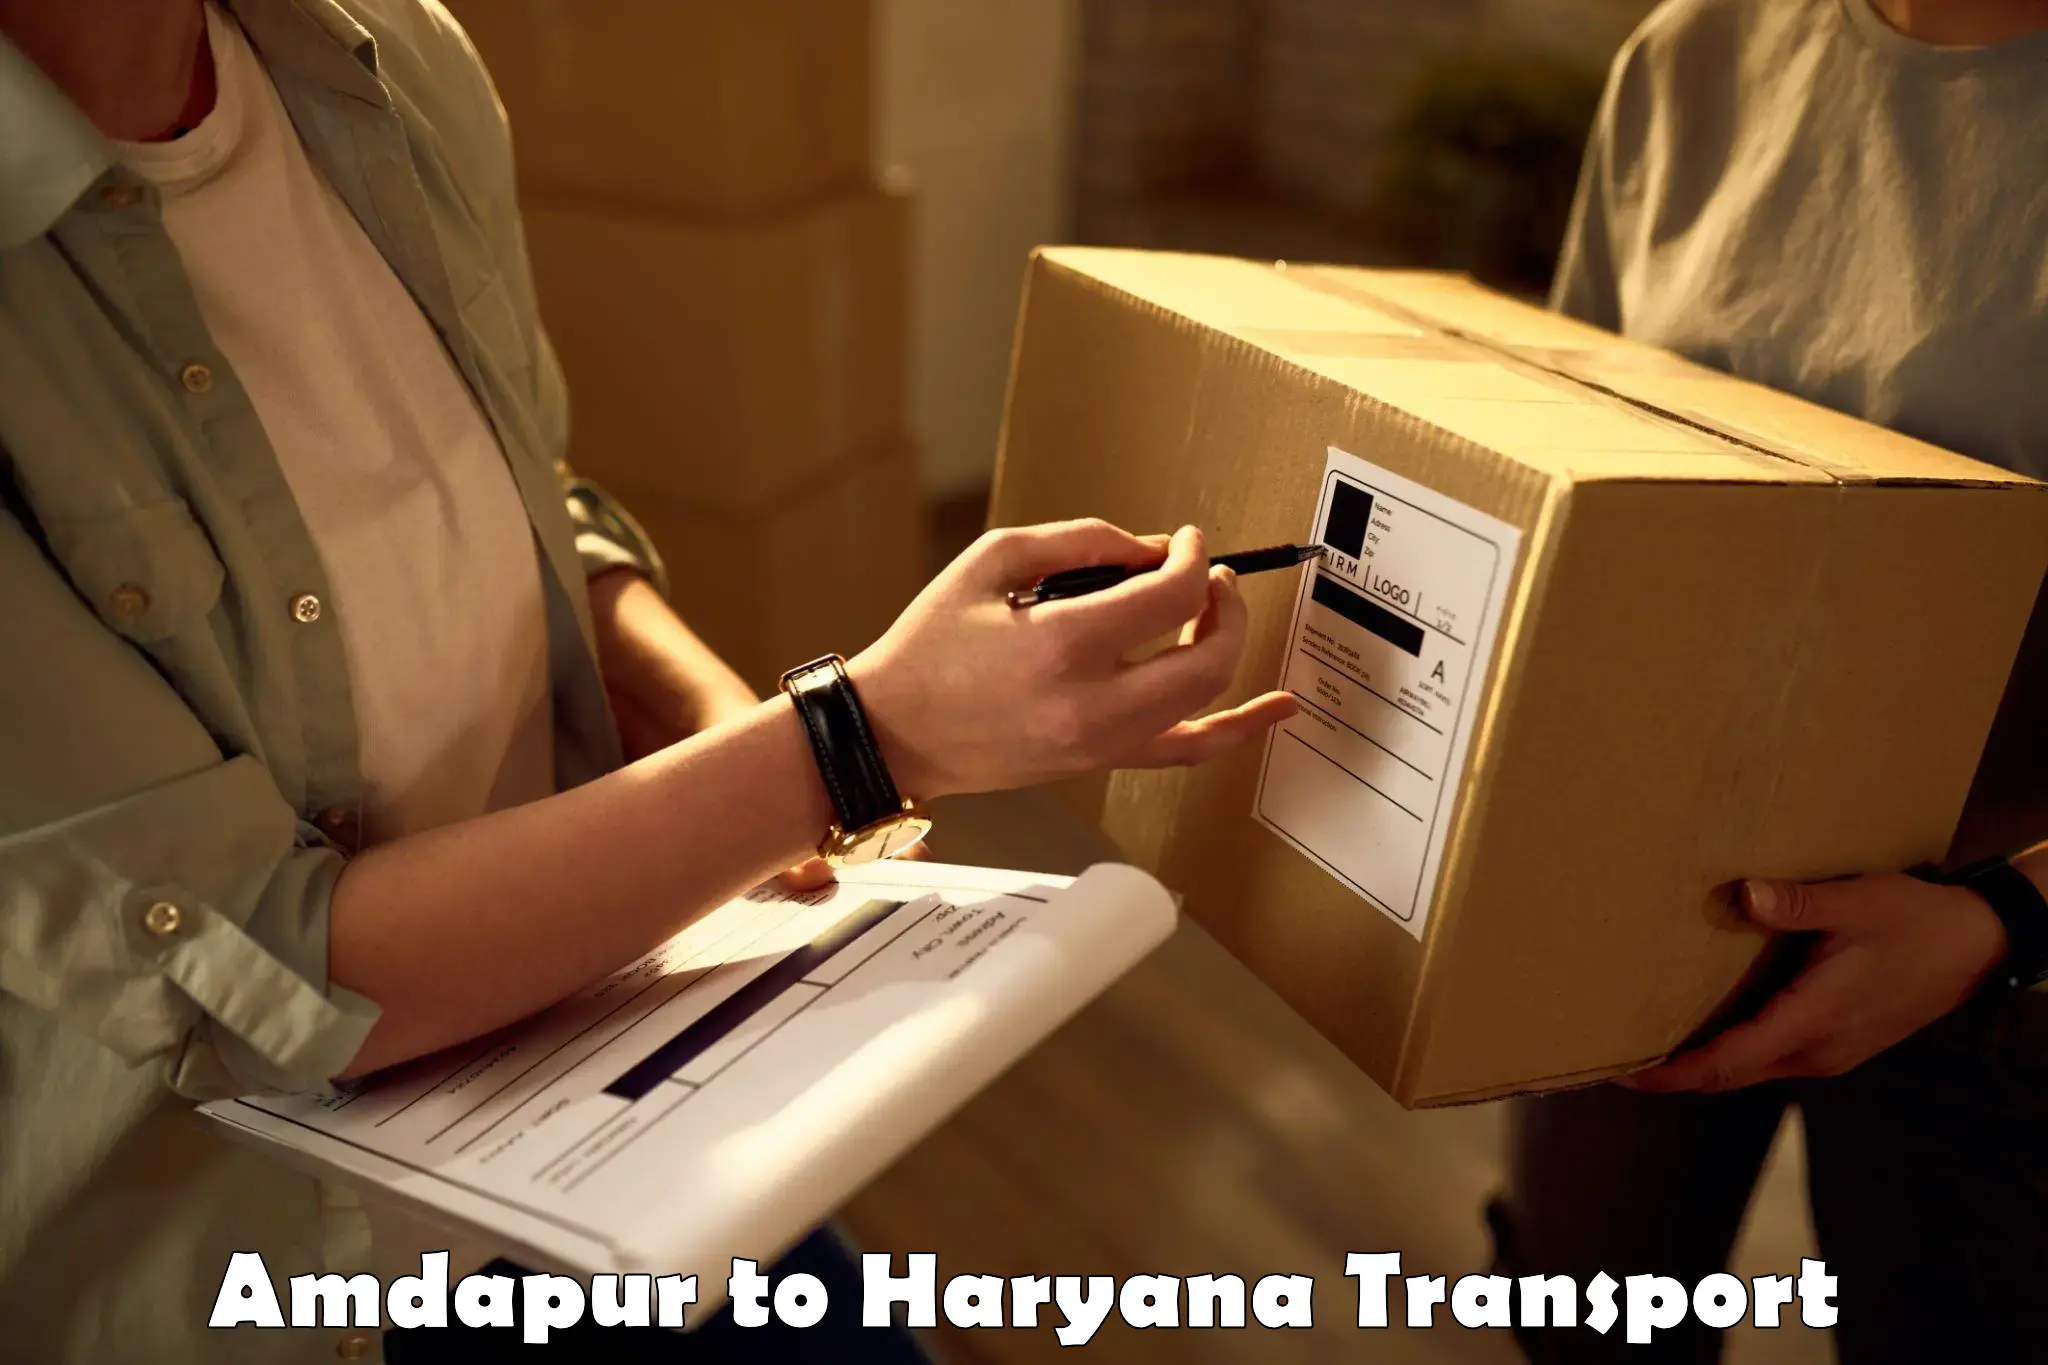 Goods delivery service Amdapur to Fatehabad